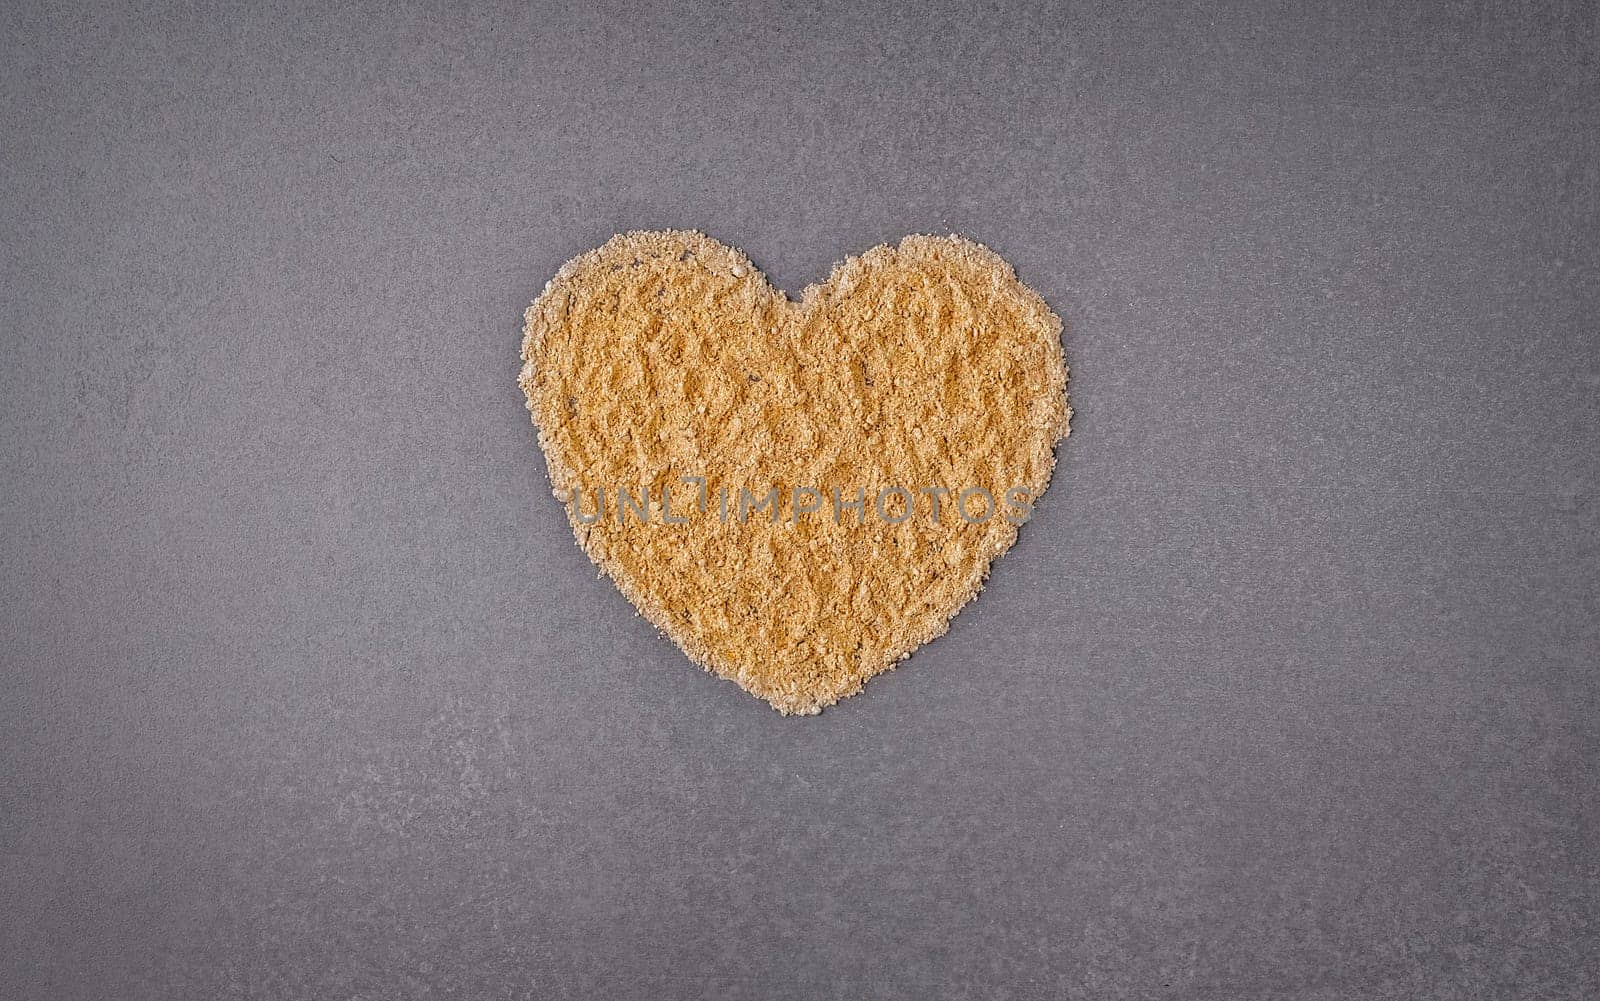 Top view of golden powder heart shape on gray background with copy space by NataliPopova